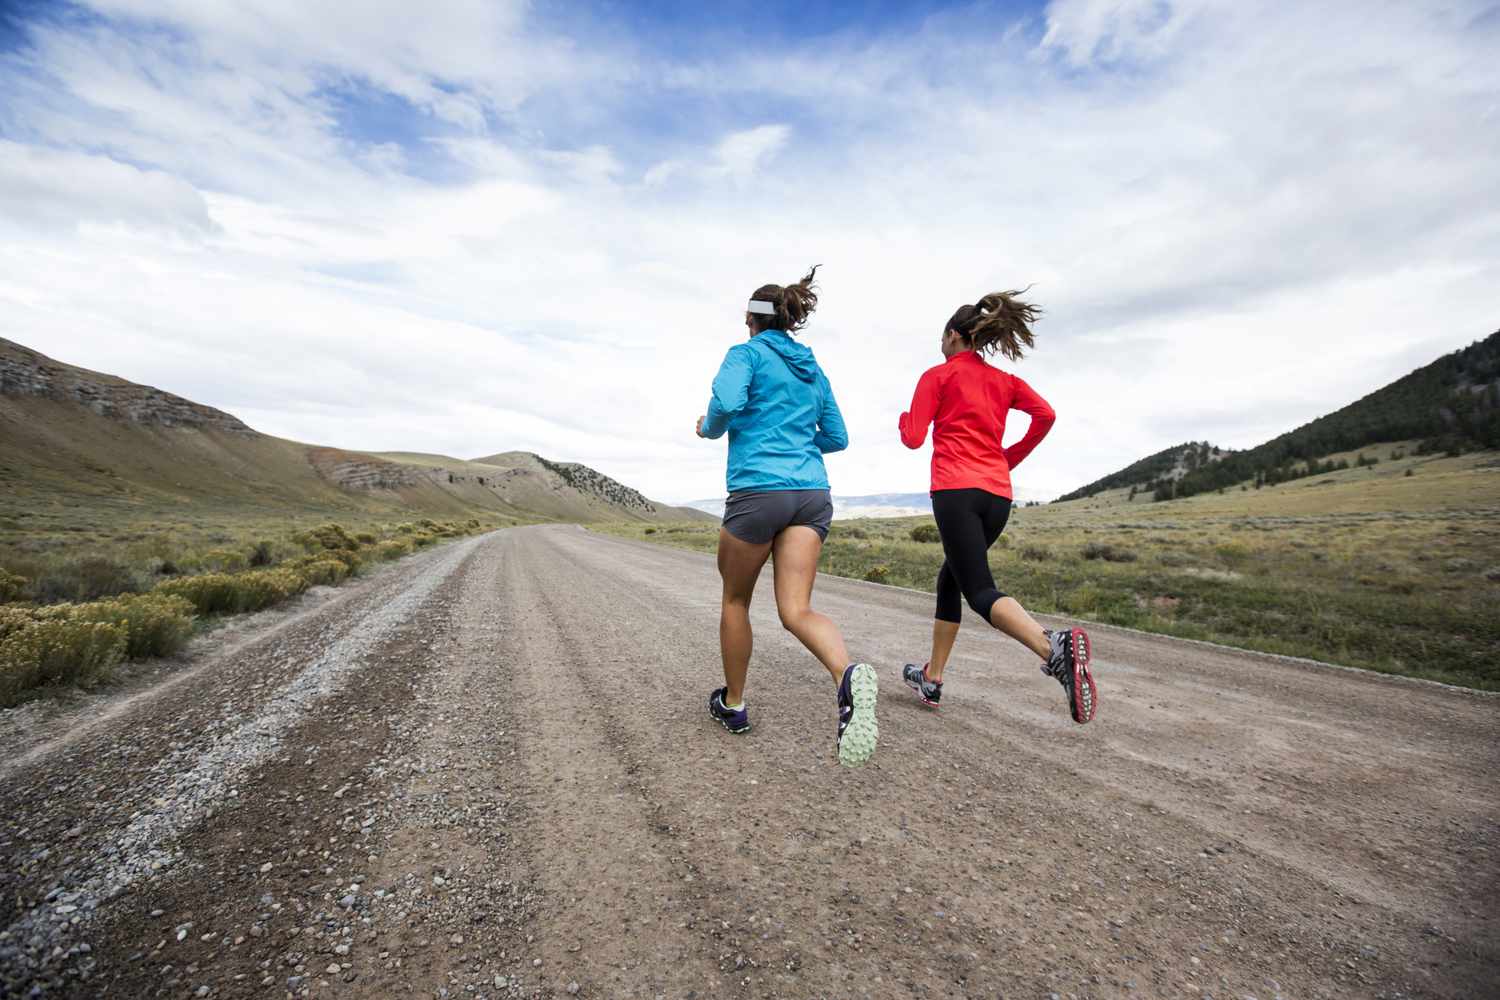 Two women running on dirt road